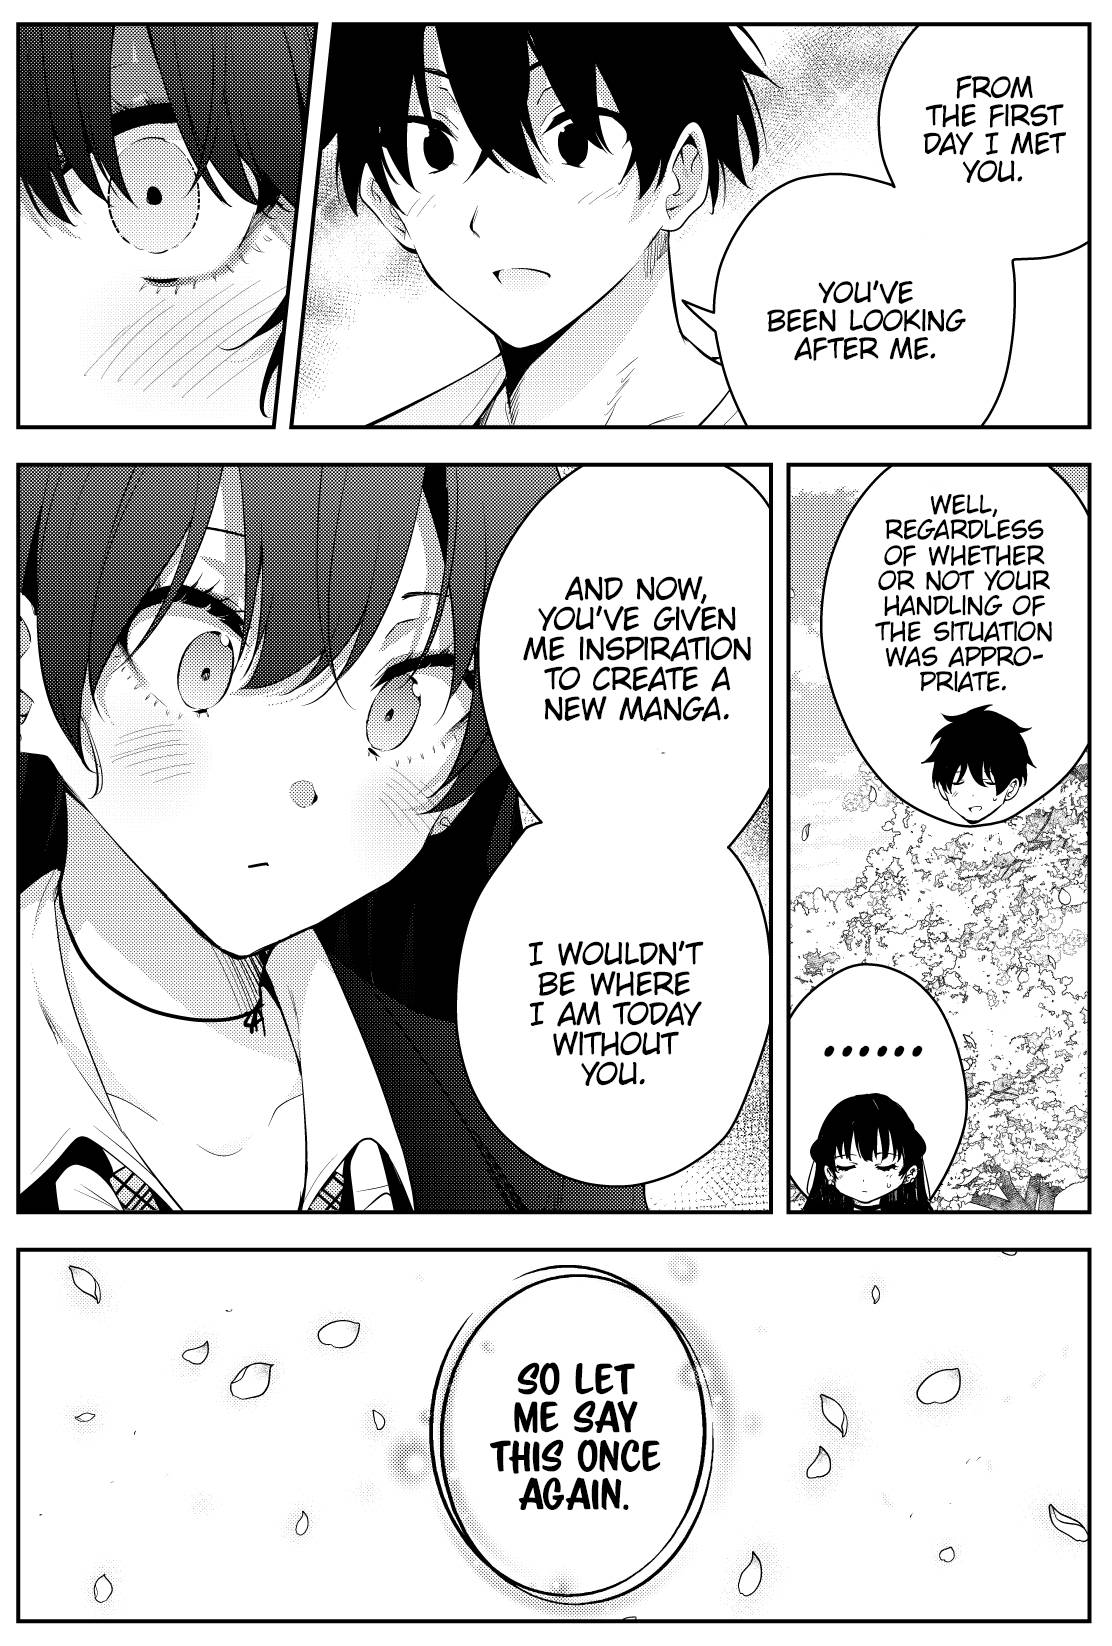 The Story Of A Manga Artist Confined By A Strange High School Girl - chapter 48 - #6